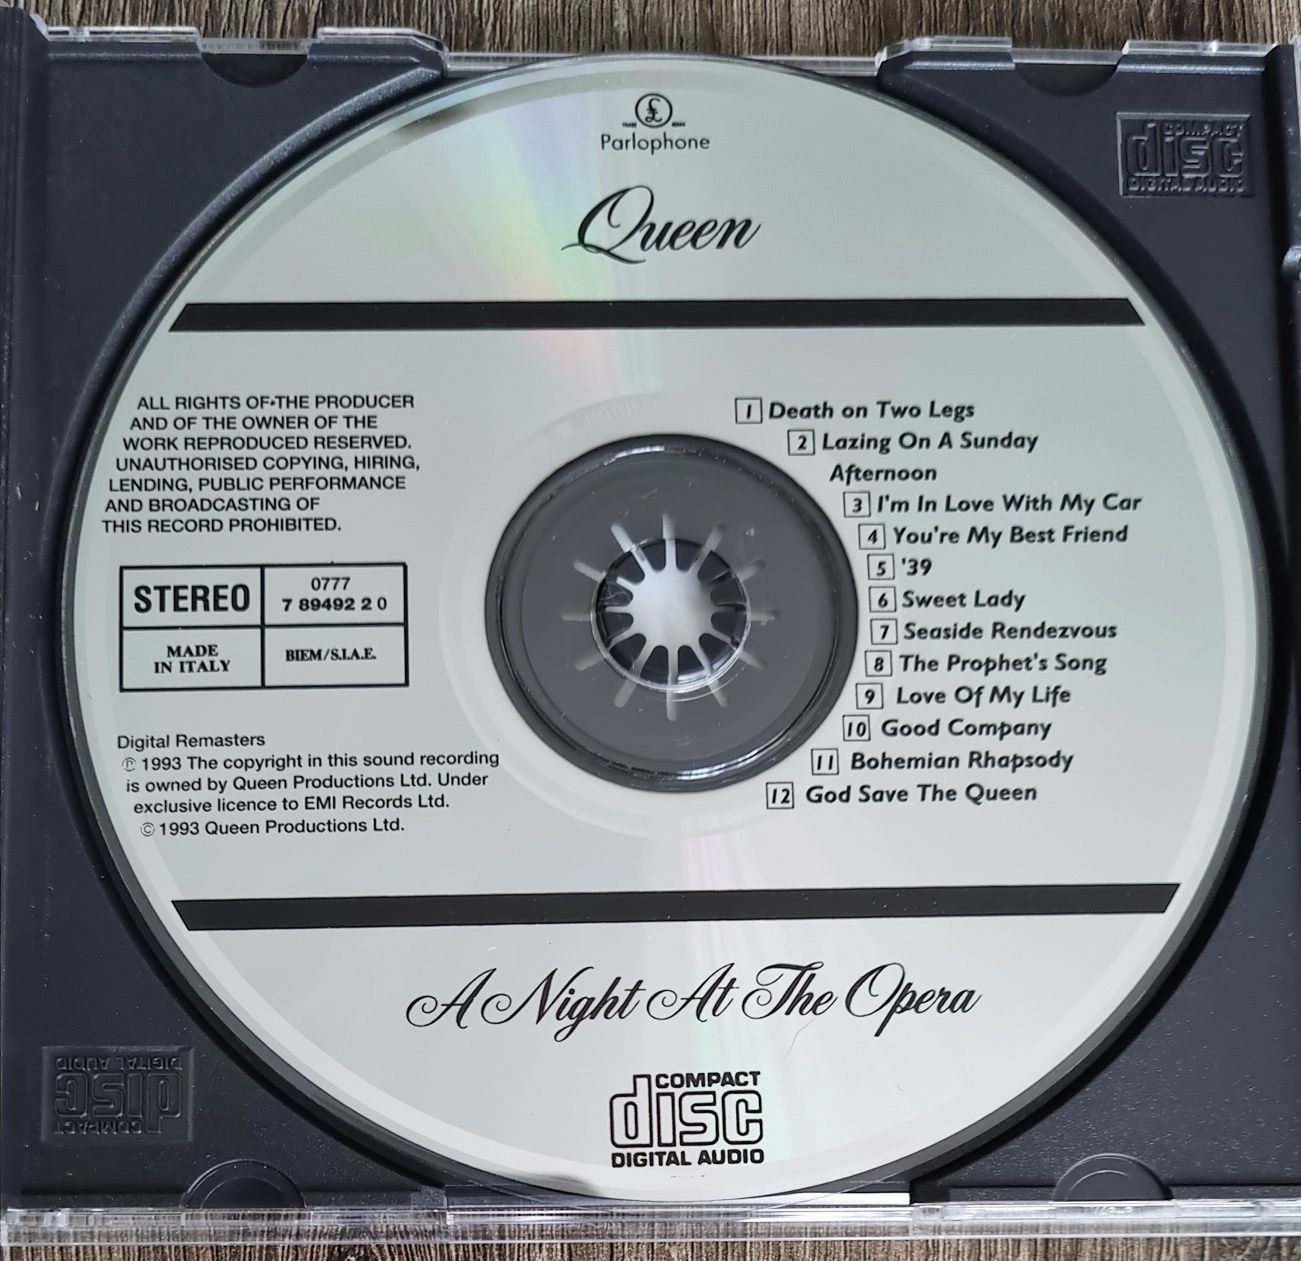 Queen - A Night At The Opera CD Parlophone